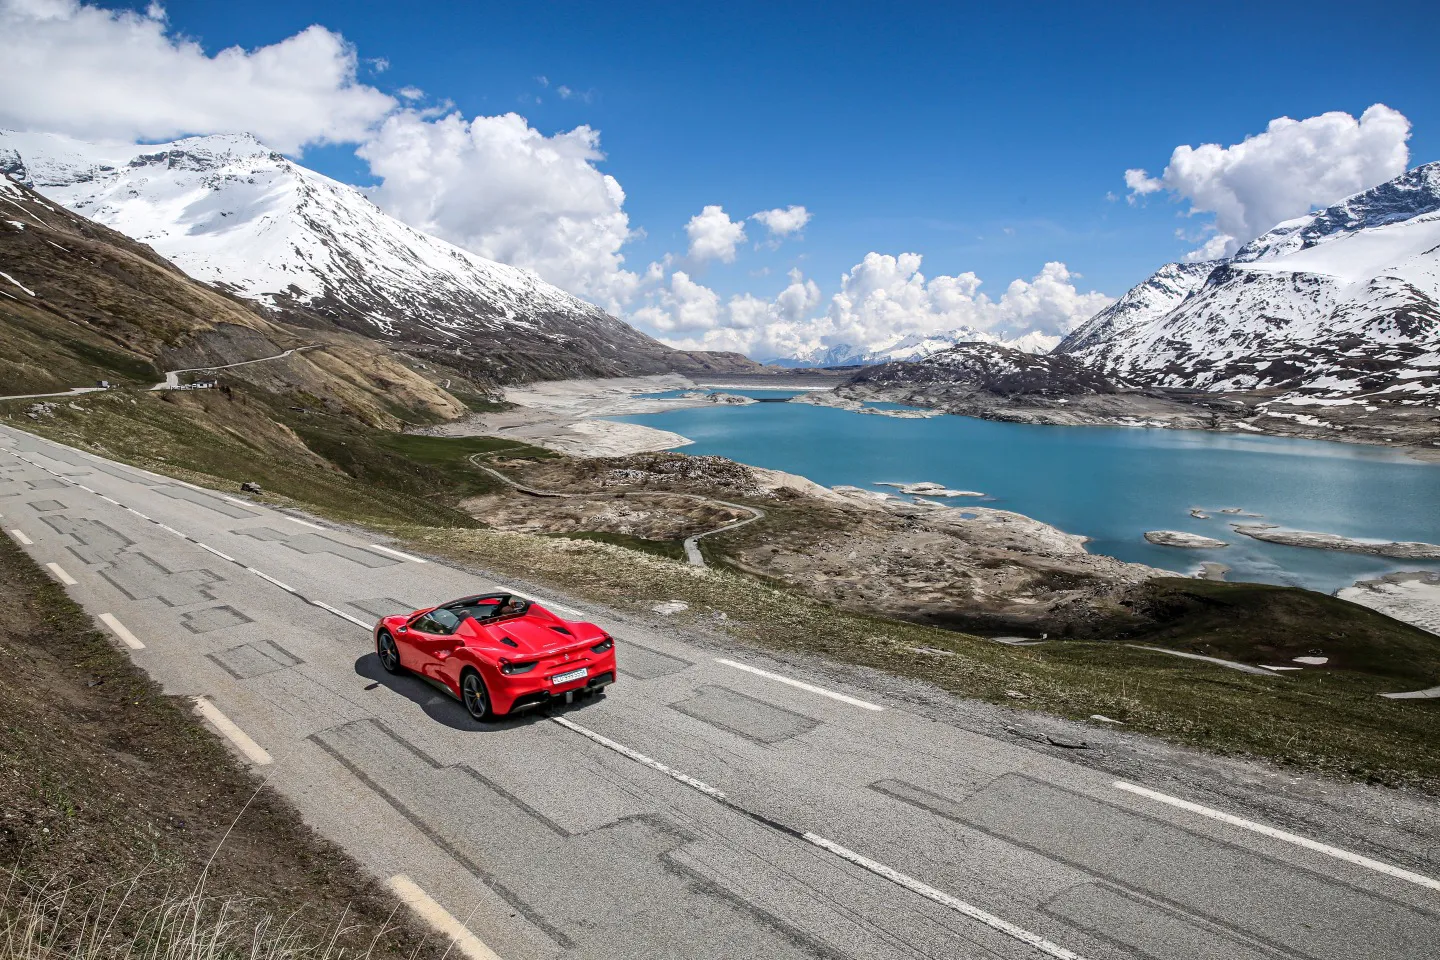 Experience the Swiss Alps and lakes regions in a Ferrari, Lamborghini and more